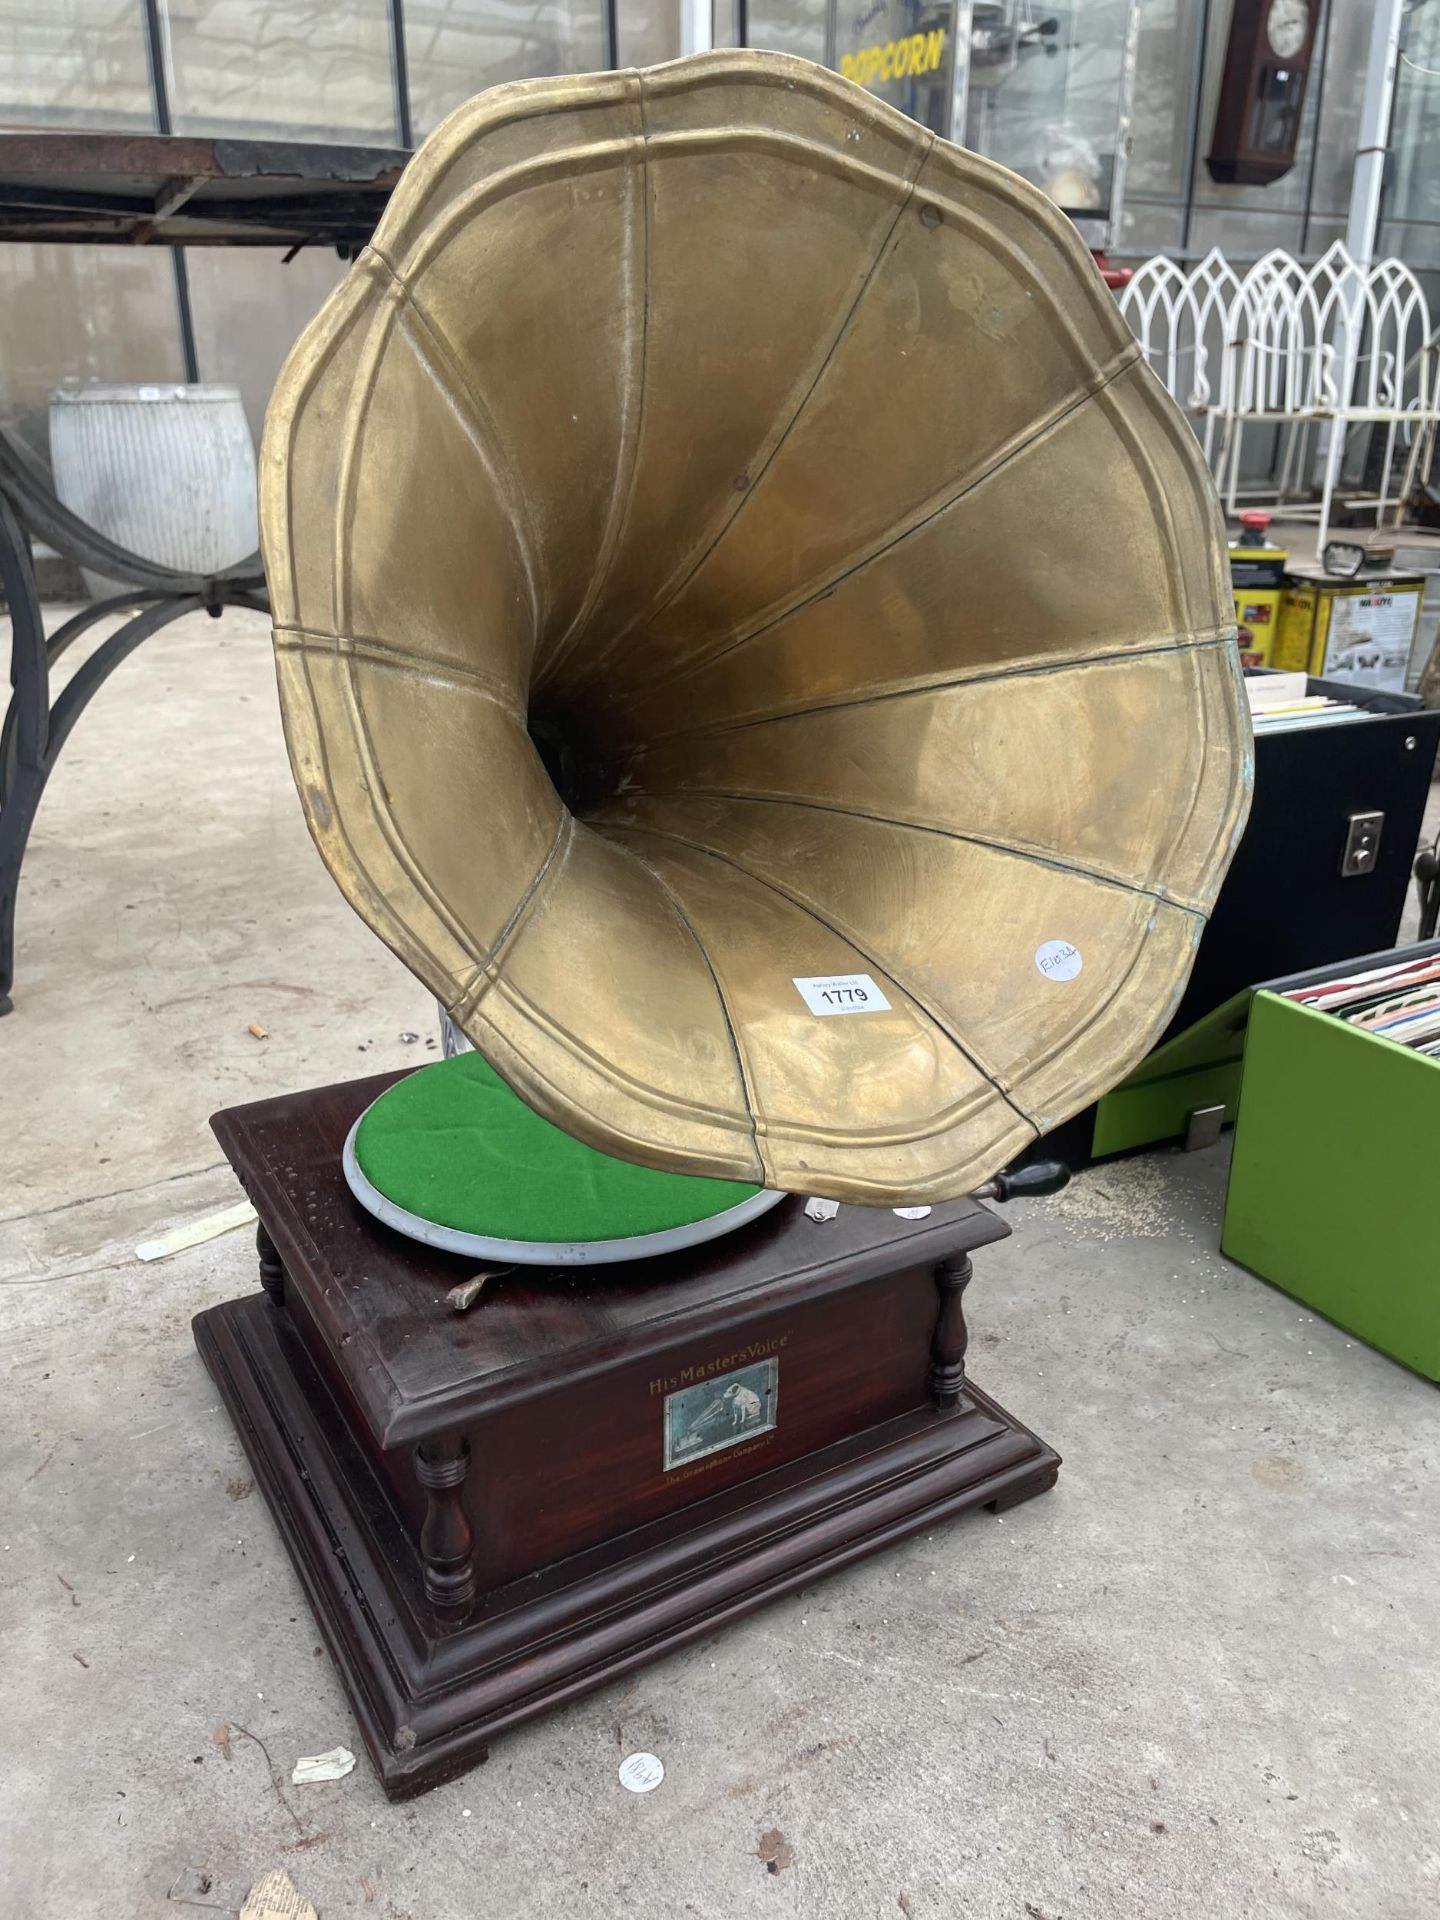 A VINTAGE HIS MASTER VOICE WIND UP GRAMAPHONE - Image 2 of 5